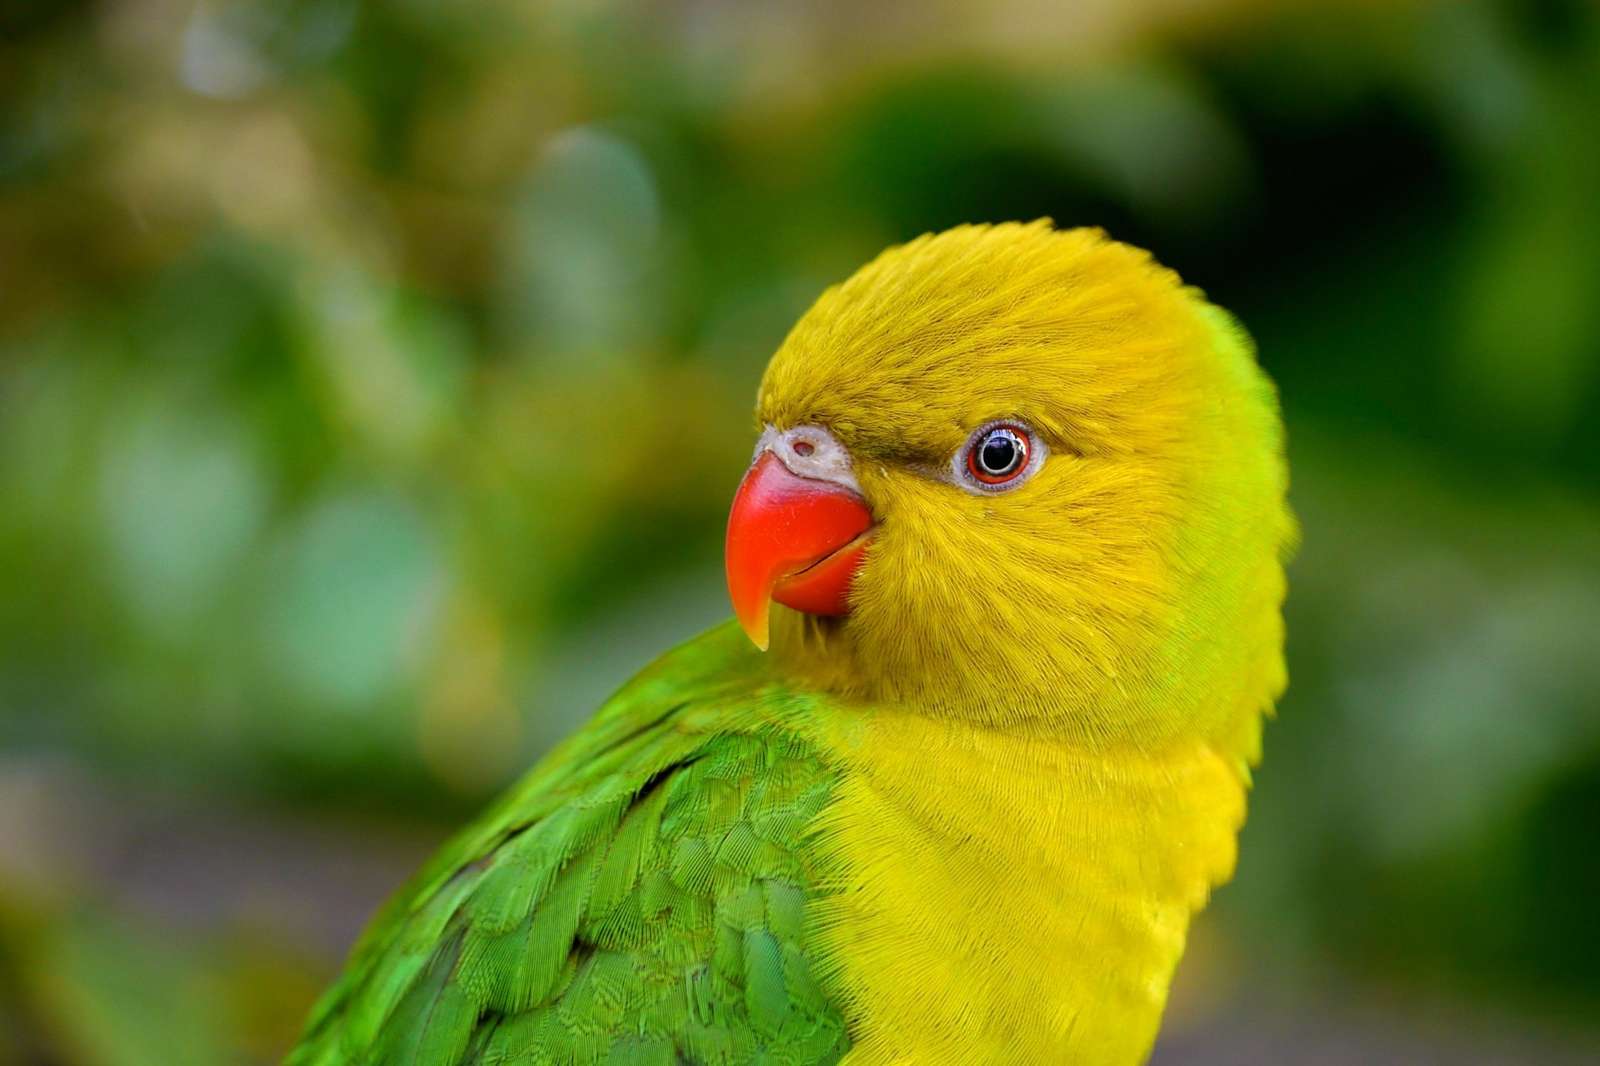 GREEN PARROT puzzle online from photo